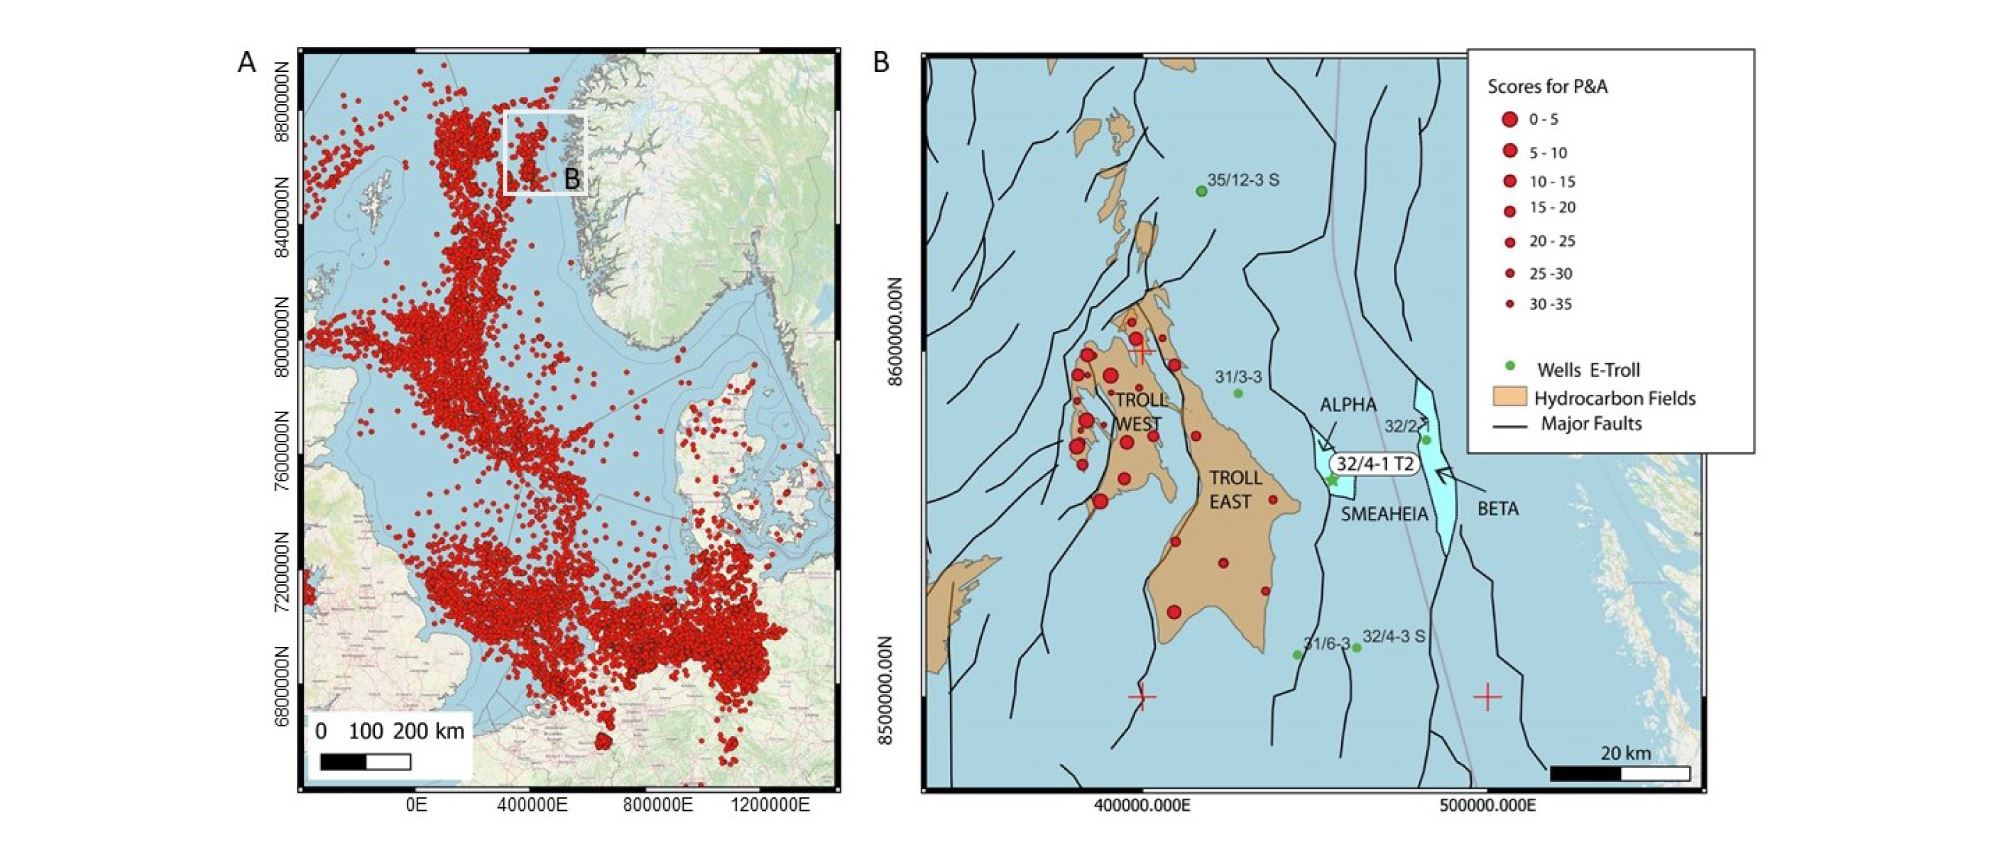 Figure 2: (A) Map of the North Sea, with well locations and a white square indicating the studied area. (B) Map of the Troll area offshore SW Norway, with well integrity screening results for 93 P&A wells indicated by red dots (Emmel and Dupuy, 2021). Major faults are shown and the location of well 32/4-1 T2 within the Smeaheia alpha structure is highlighted and marked with a green star. From (Romdhane et al., 2022).